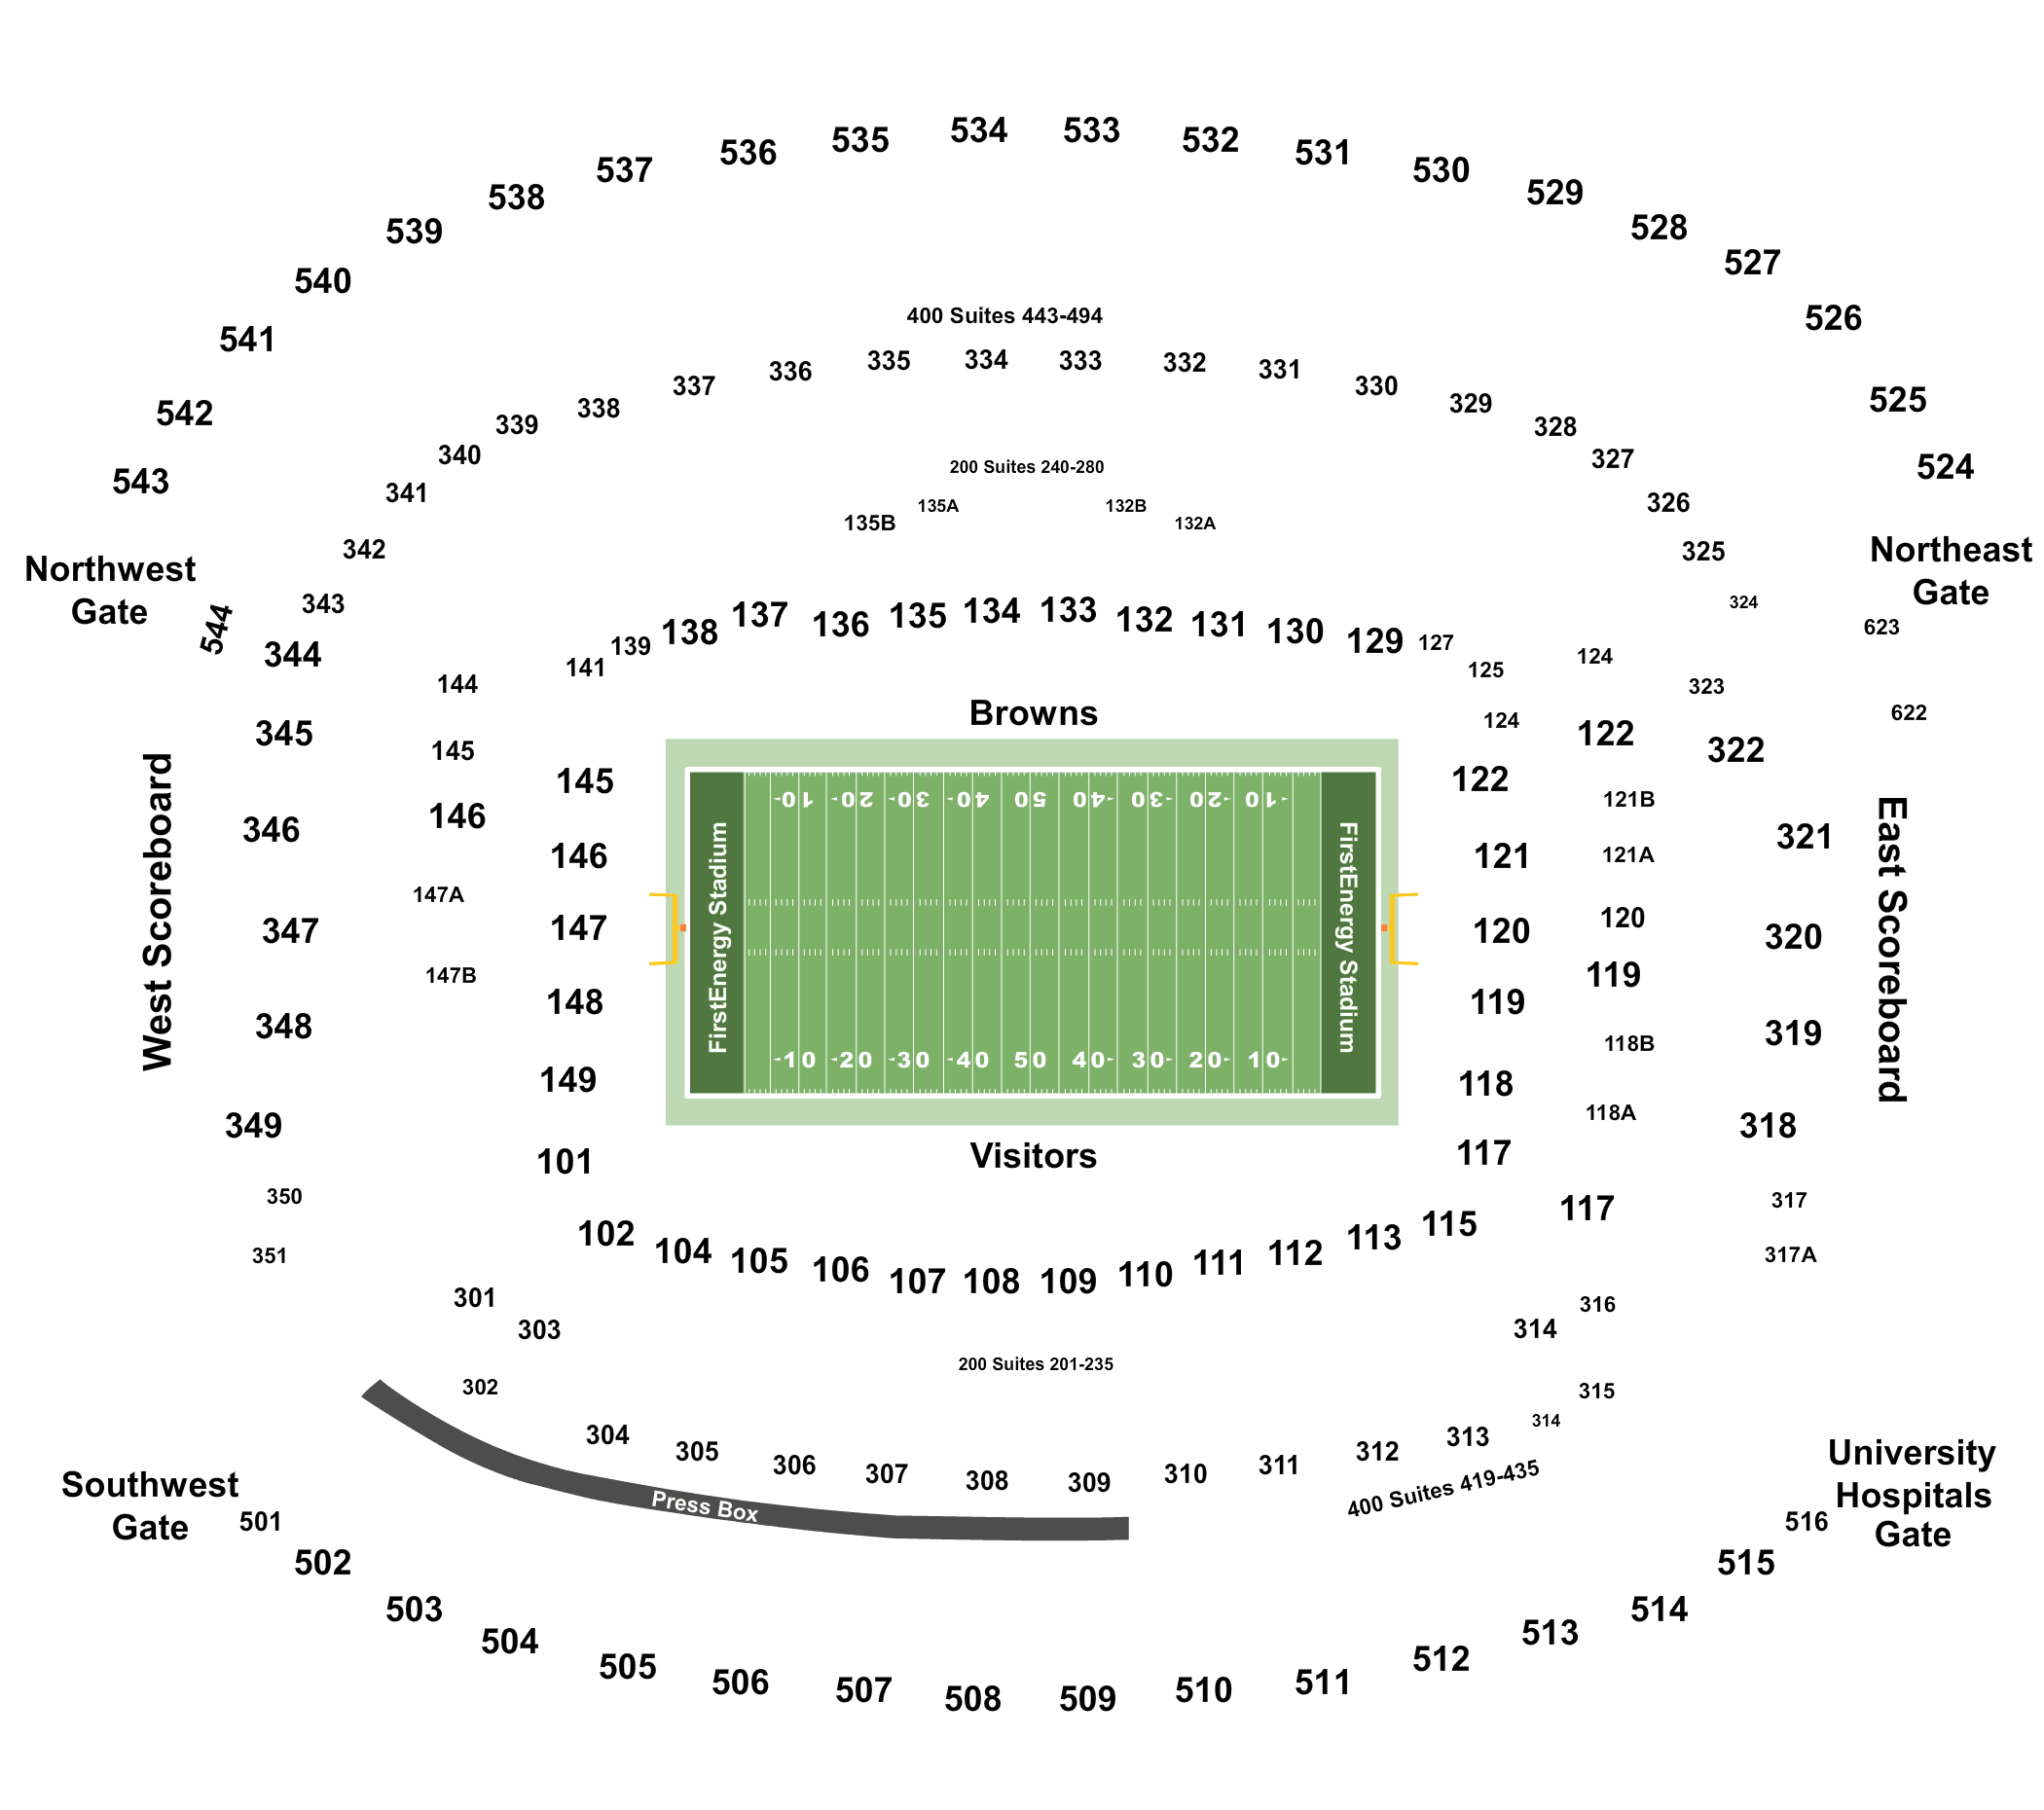 cleveland browns football tickets